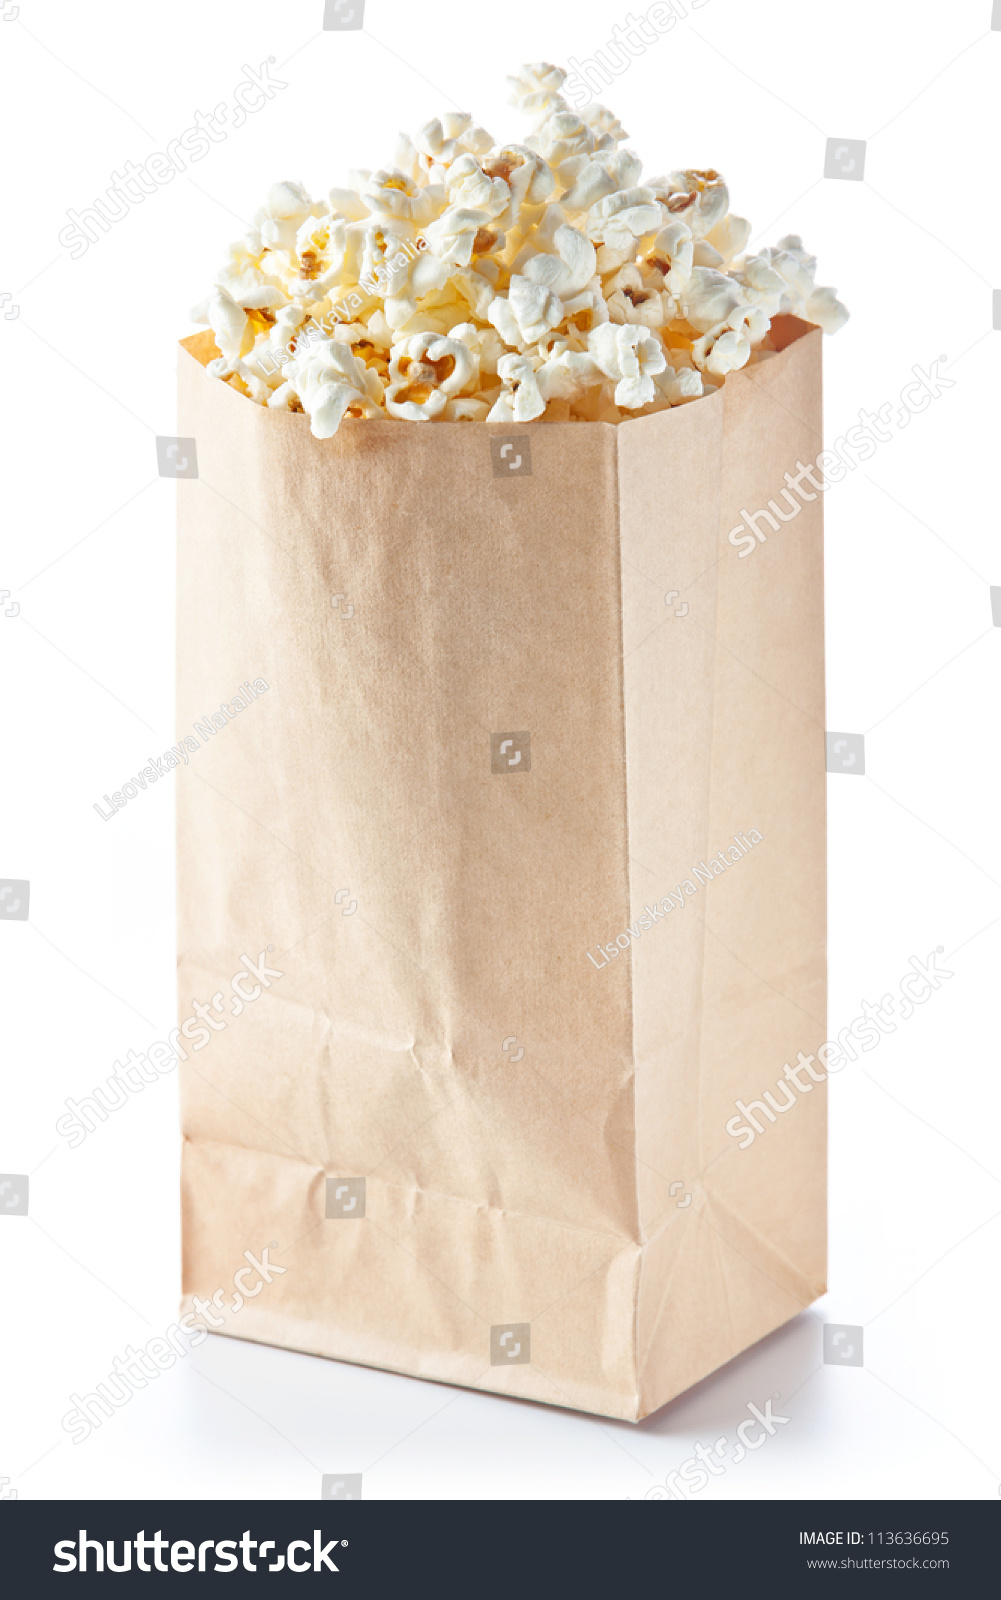 Download Popcorn Bag On White Background Food And Drink Stock Image 113636695 PSD Mockup Templates